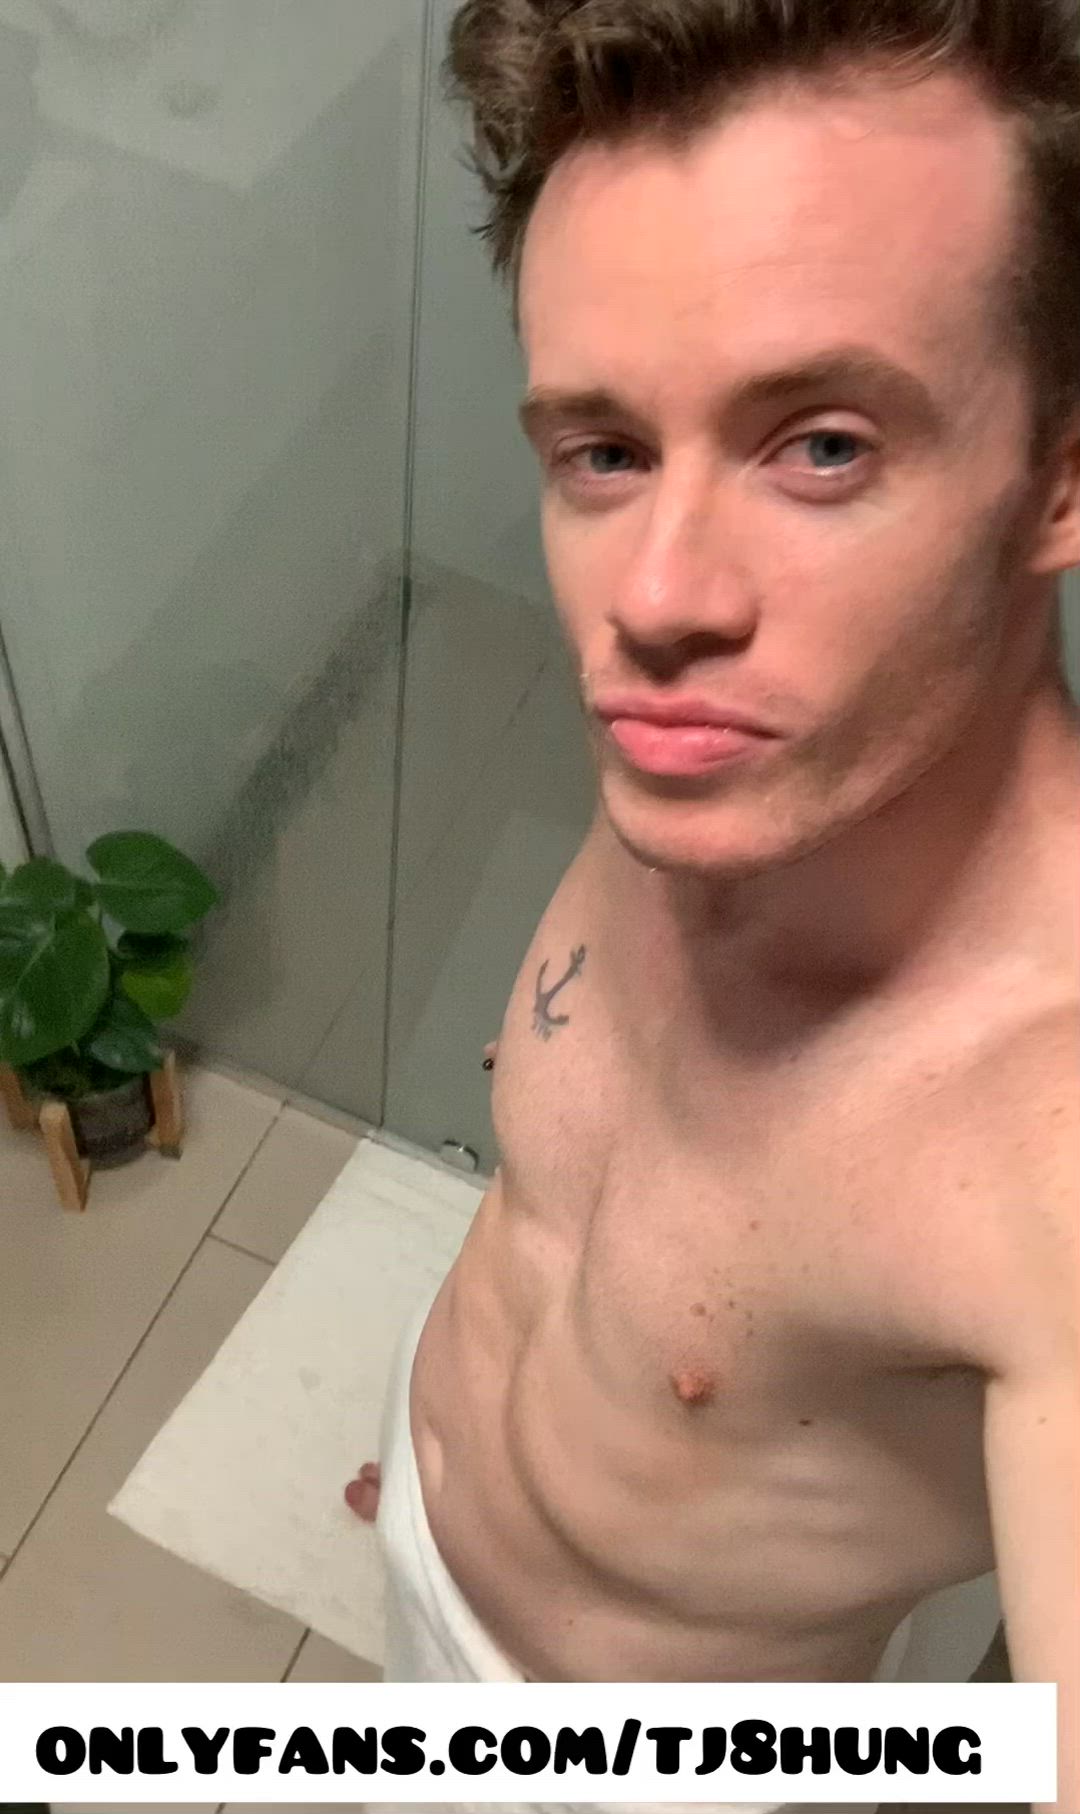 Big Dick porn video with onlyfans model tj8hung <strong>@tj8hung</strong>